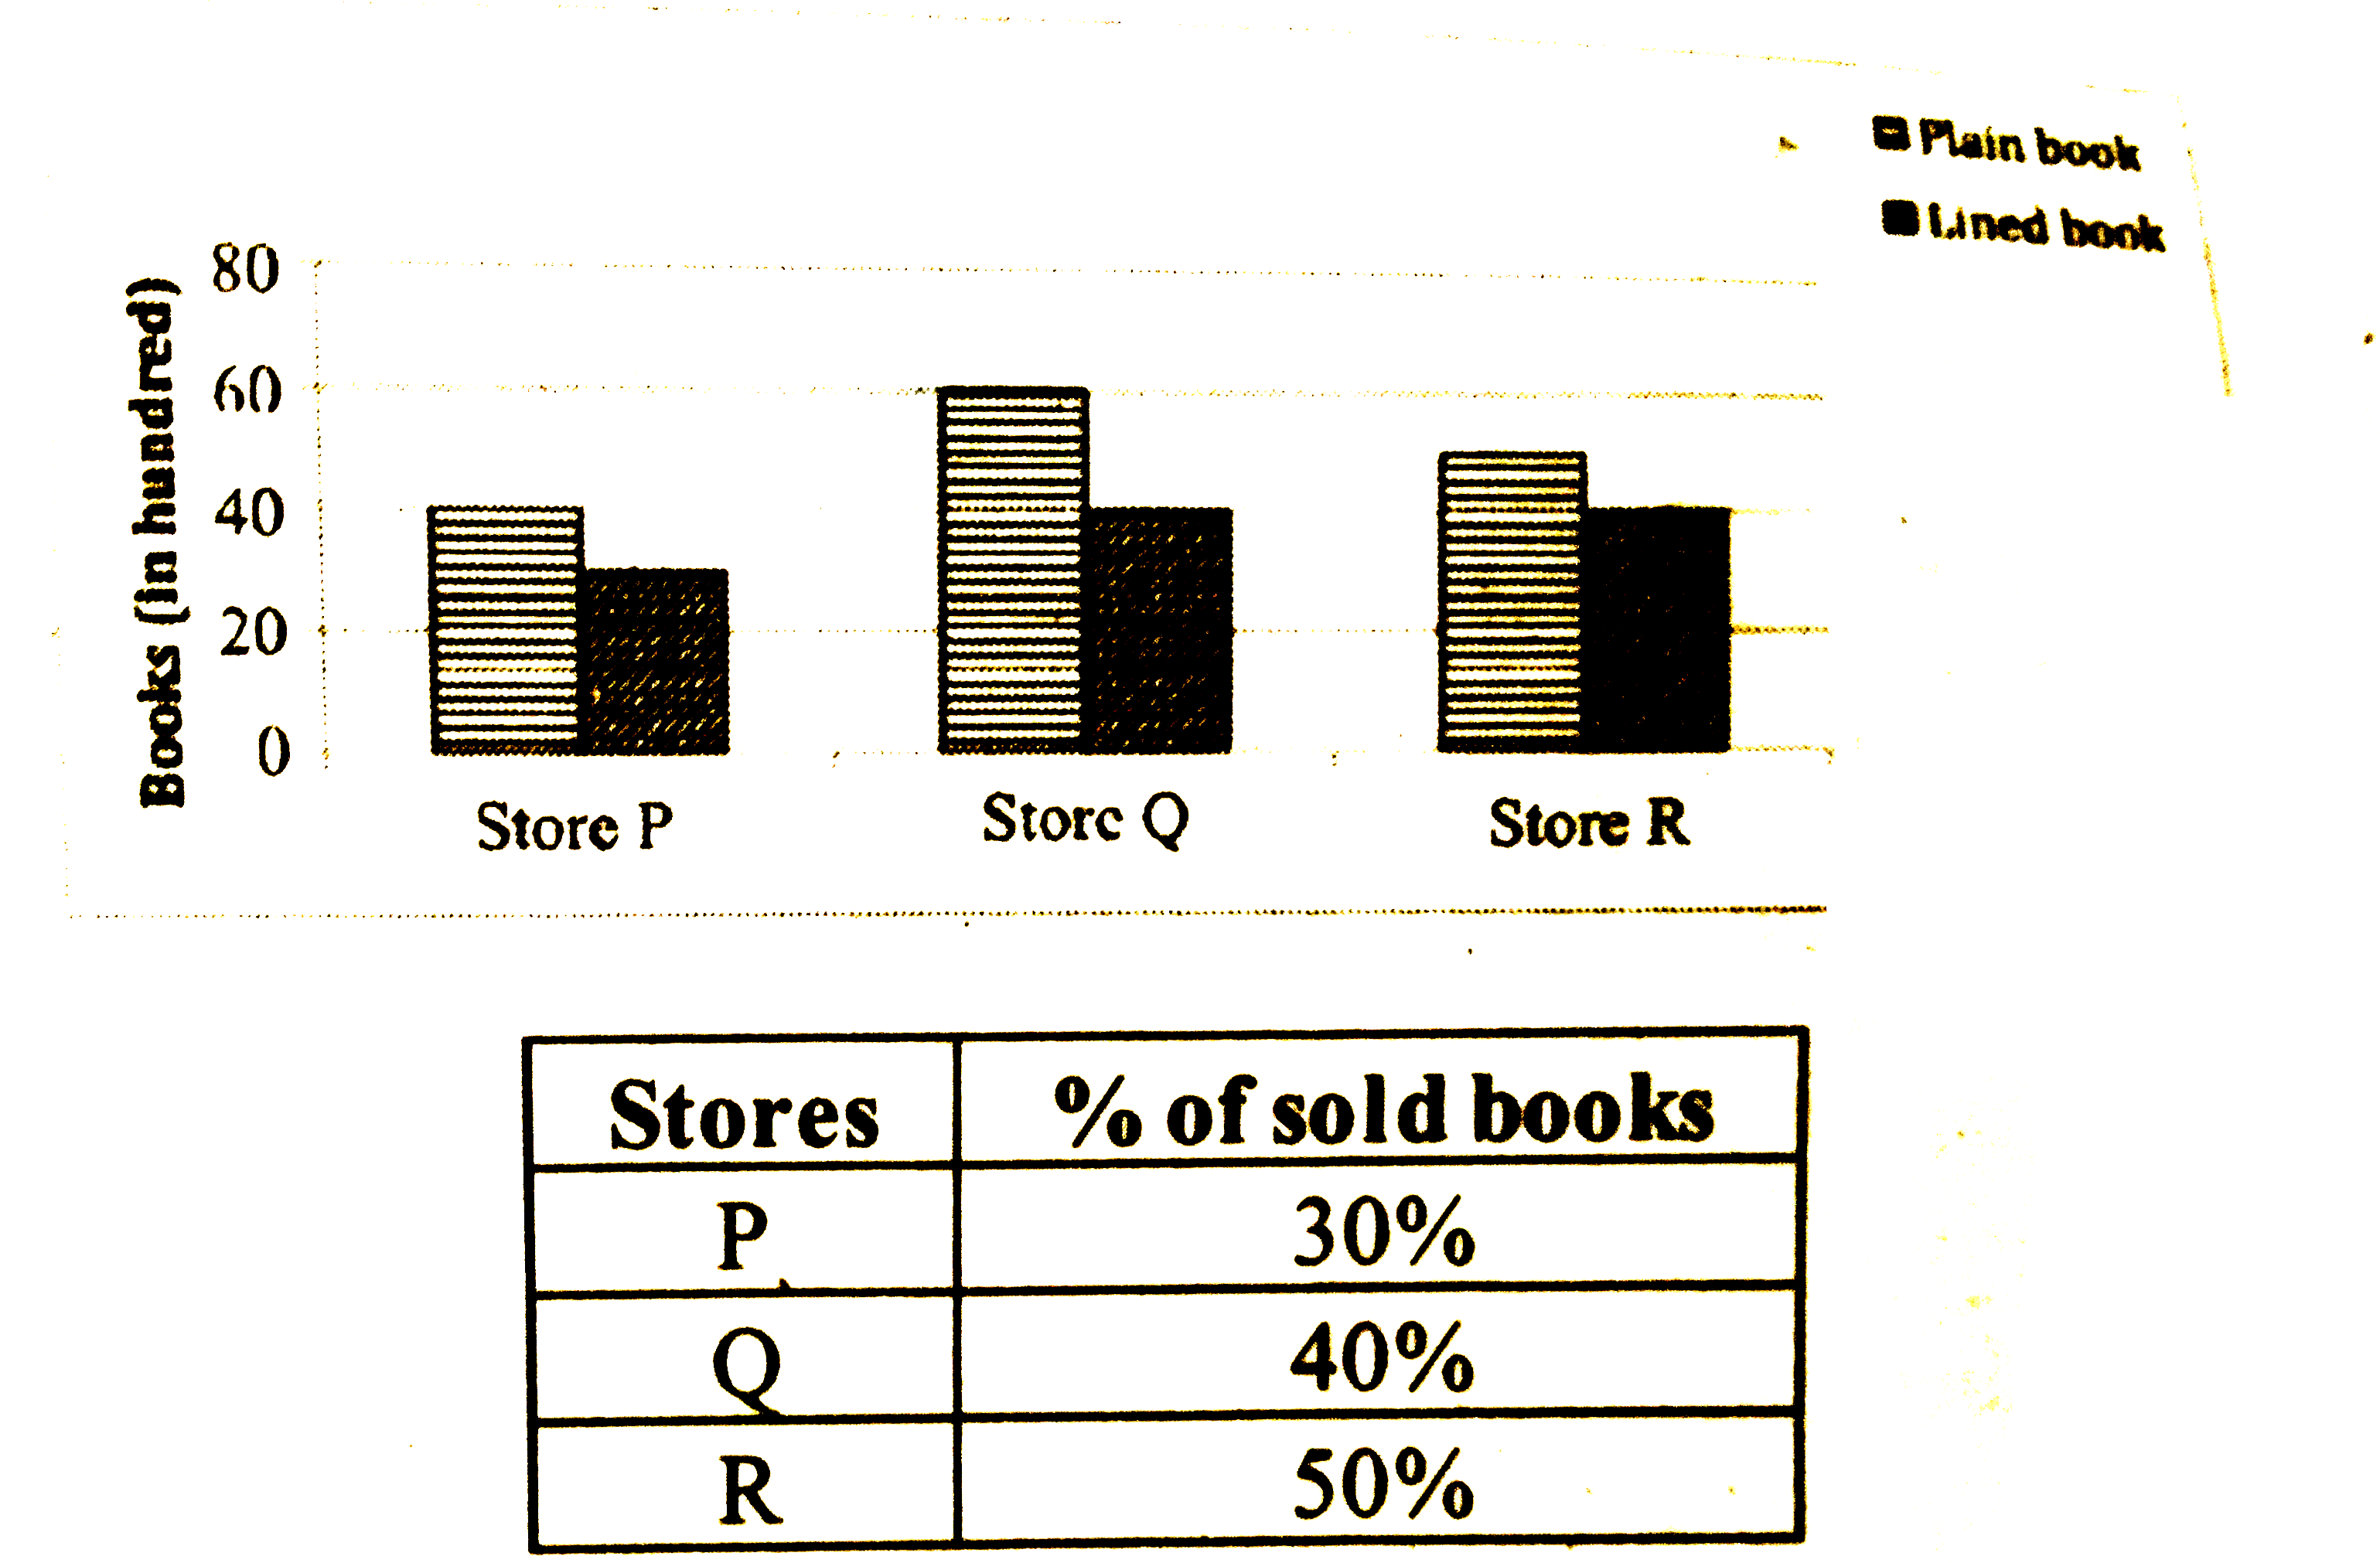 Unsold books of store P in approximately what percent more or less than total unsold books of store Q and R together.